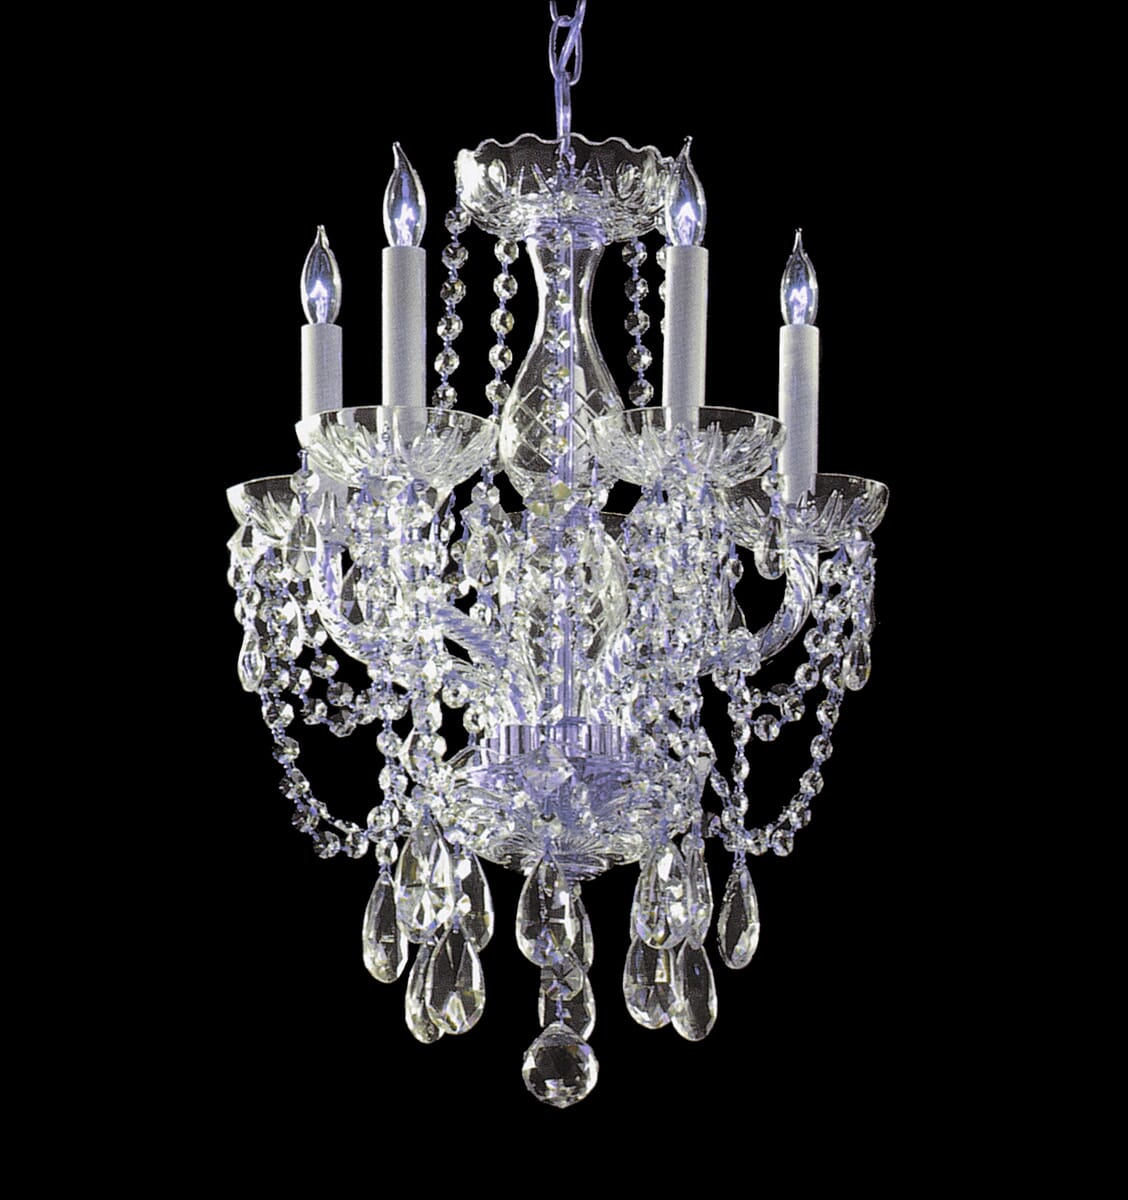 Traditional Crystal 5-Light 20"" Mini Chandelier in Polished Chrome with Clear Spectra Crystals -  Crystorama, 1129-CH-CL-SAQ